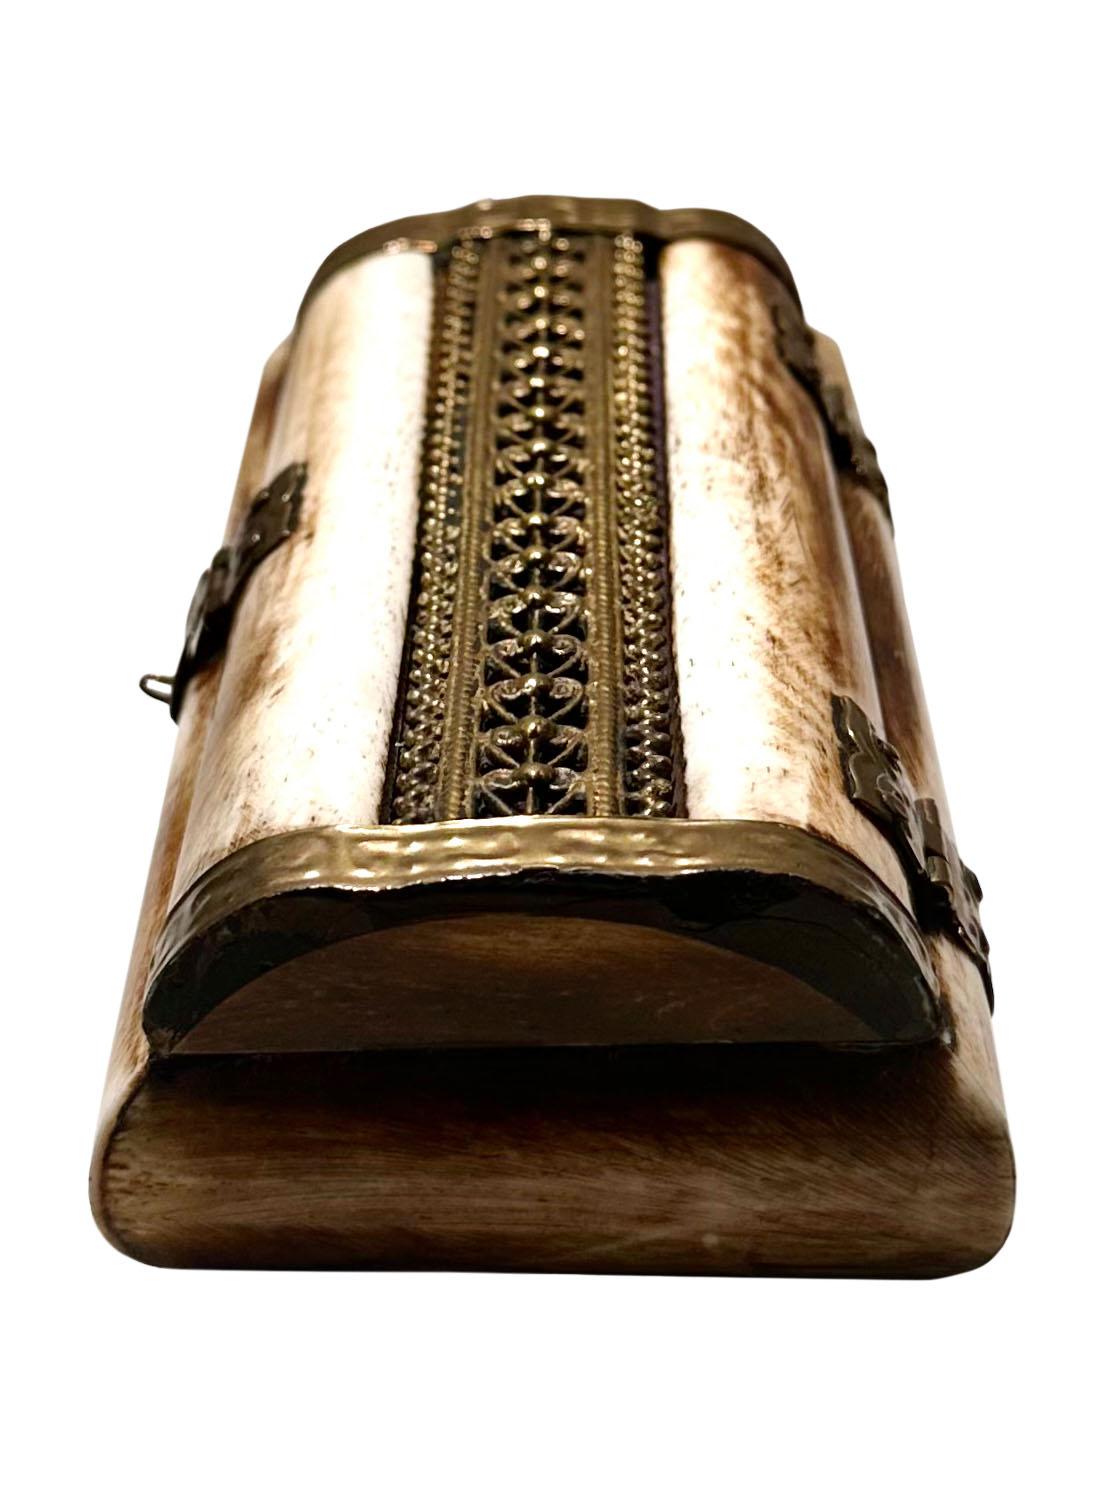 Fabulous Indian box made of bone and pierced brass with a wood bottom.A very nice design. Turn of the century, India.